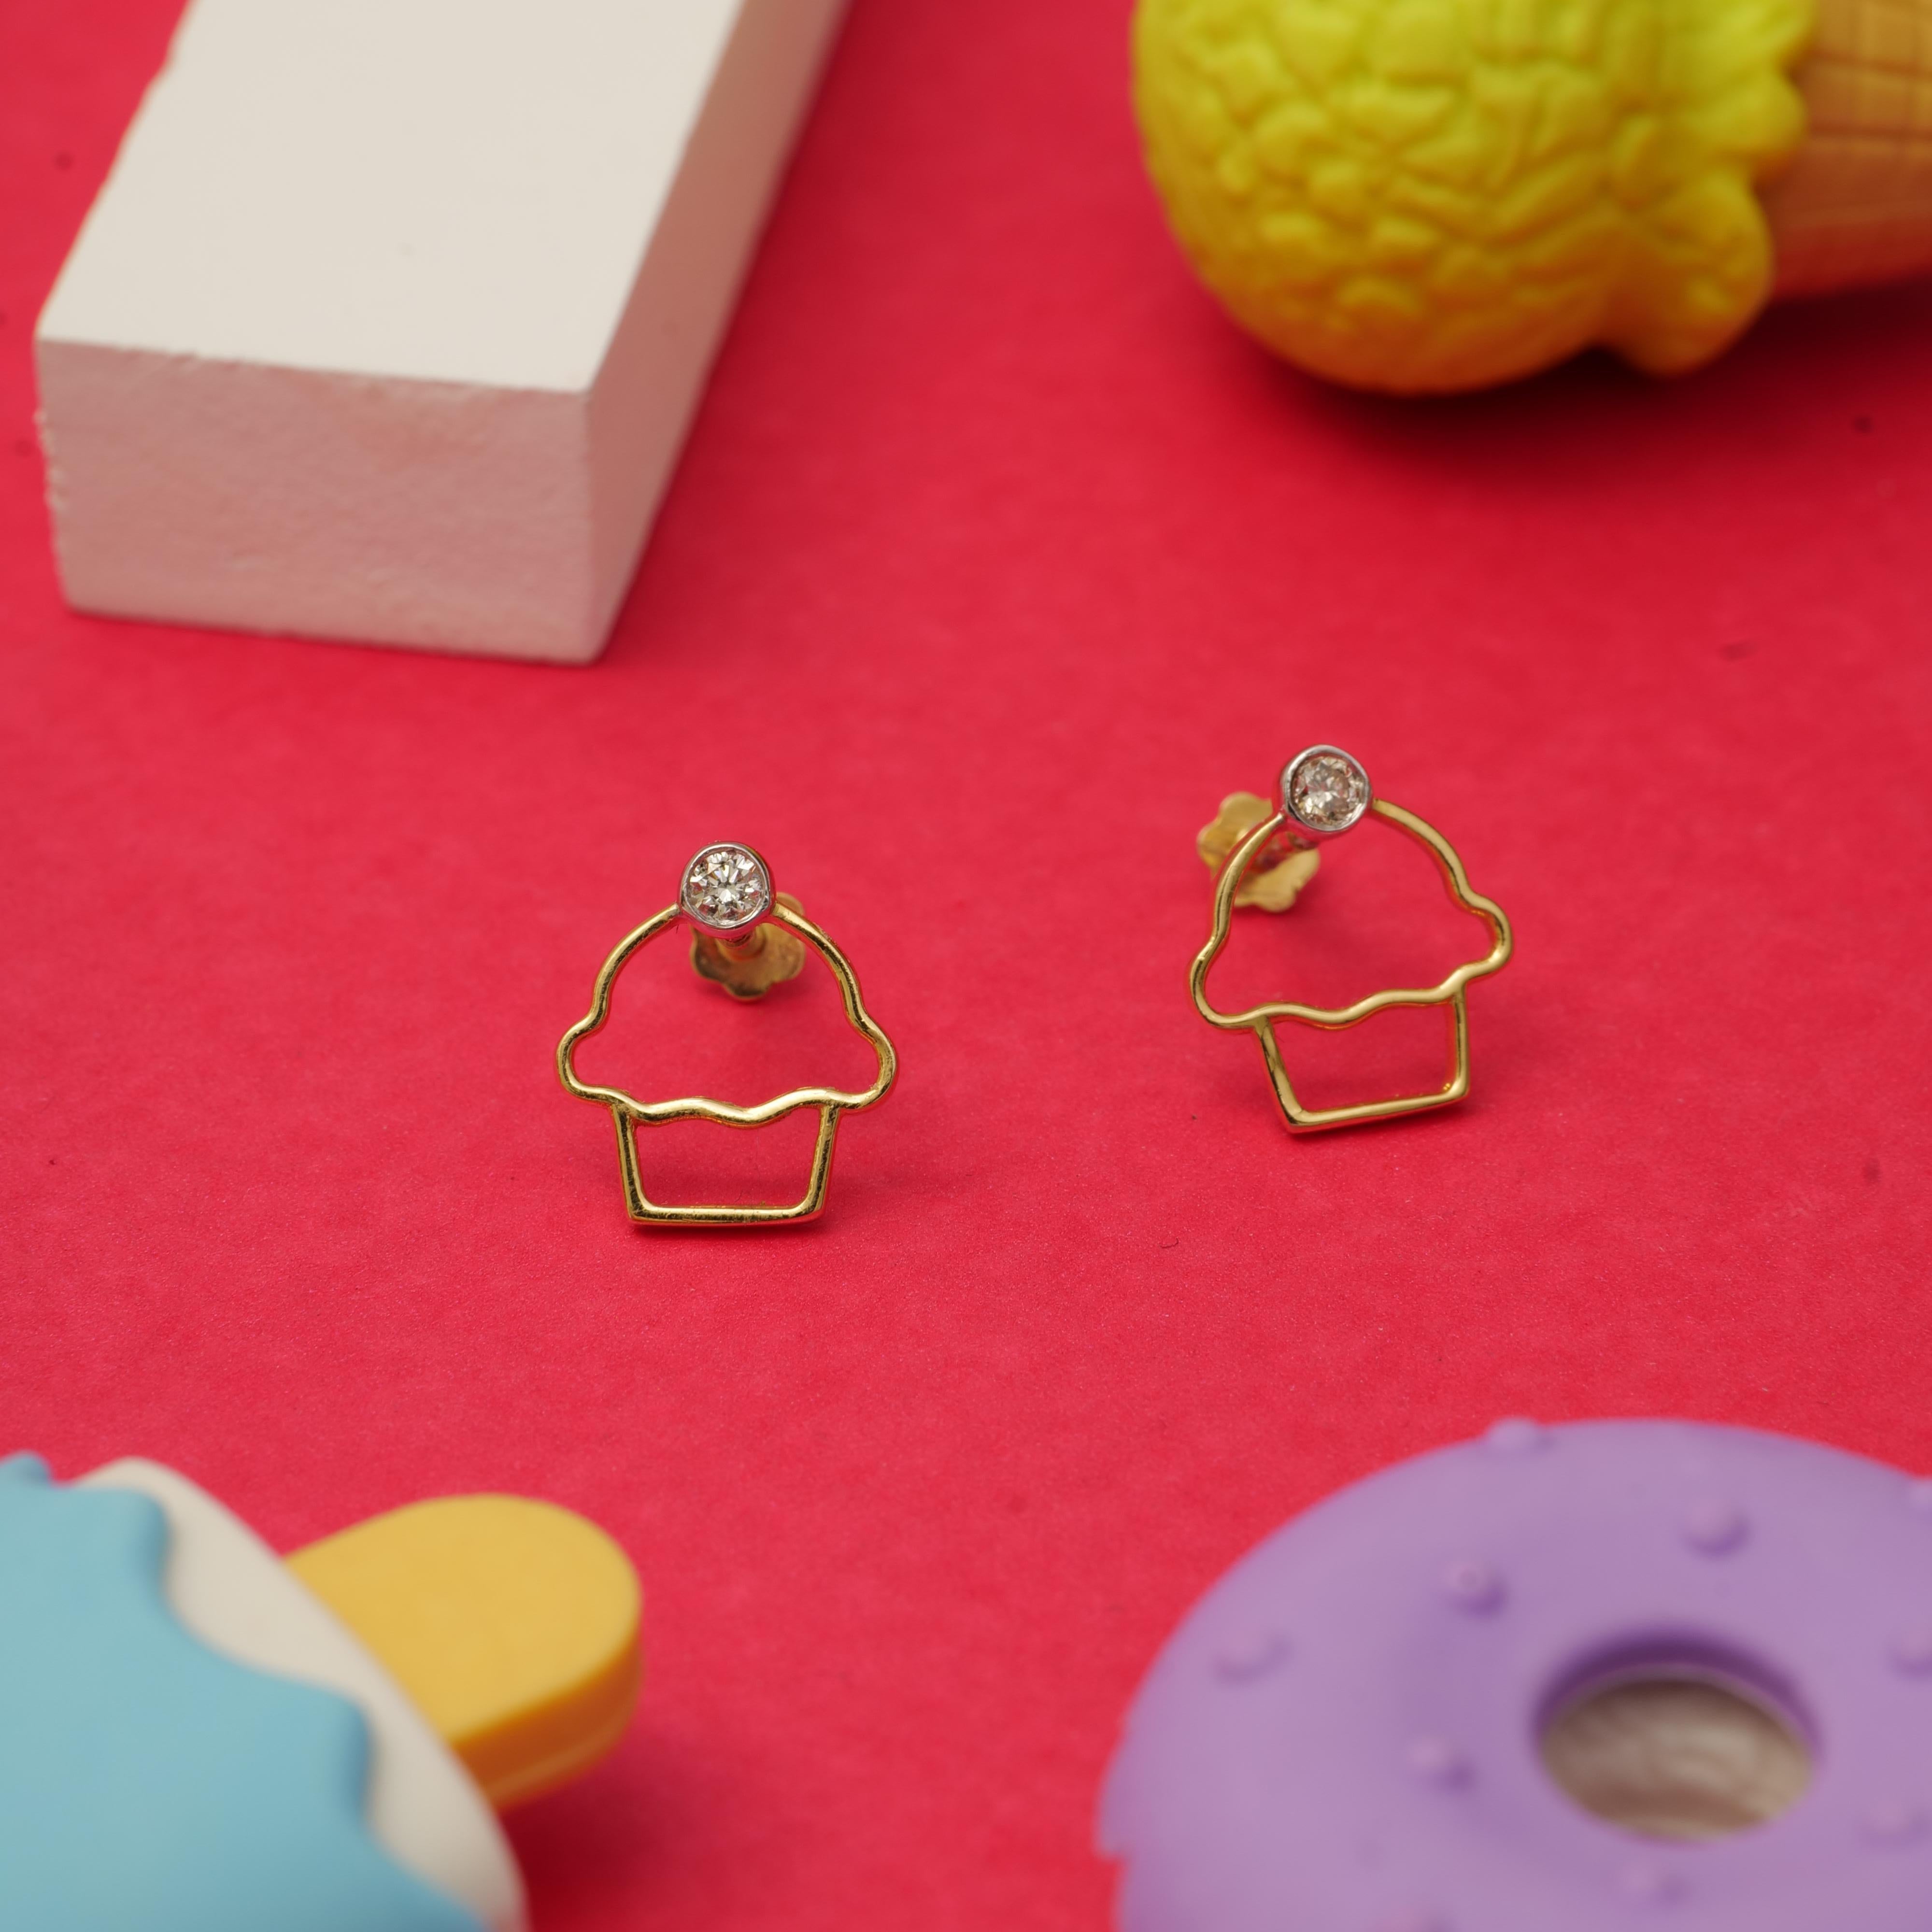 
Cupcake Diamond Earrings for Girls (Kids/Toddlers) in 18K Solid Gold are whimsical and adorable jewelry pieces designed with young children in mind. These earrings feature a delightful cupcake design meticulously crafted from high-quality 18K solid